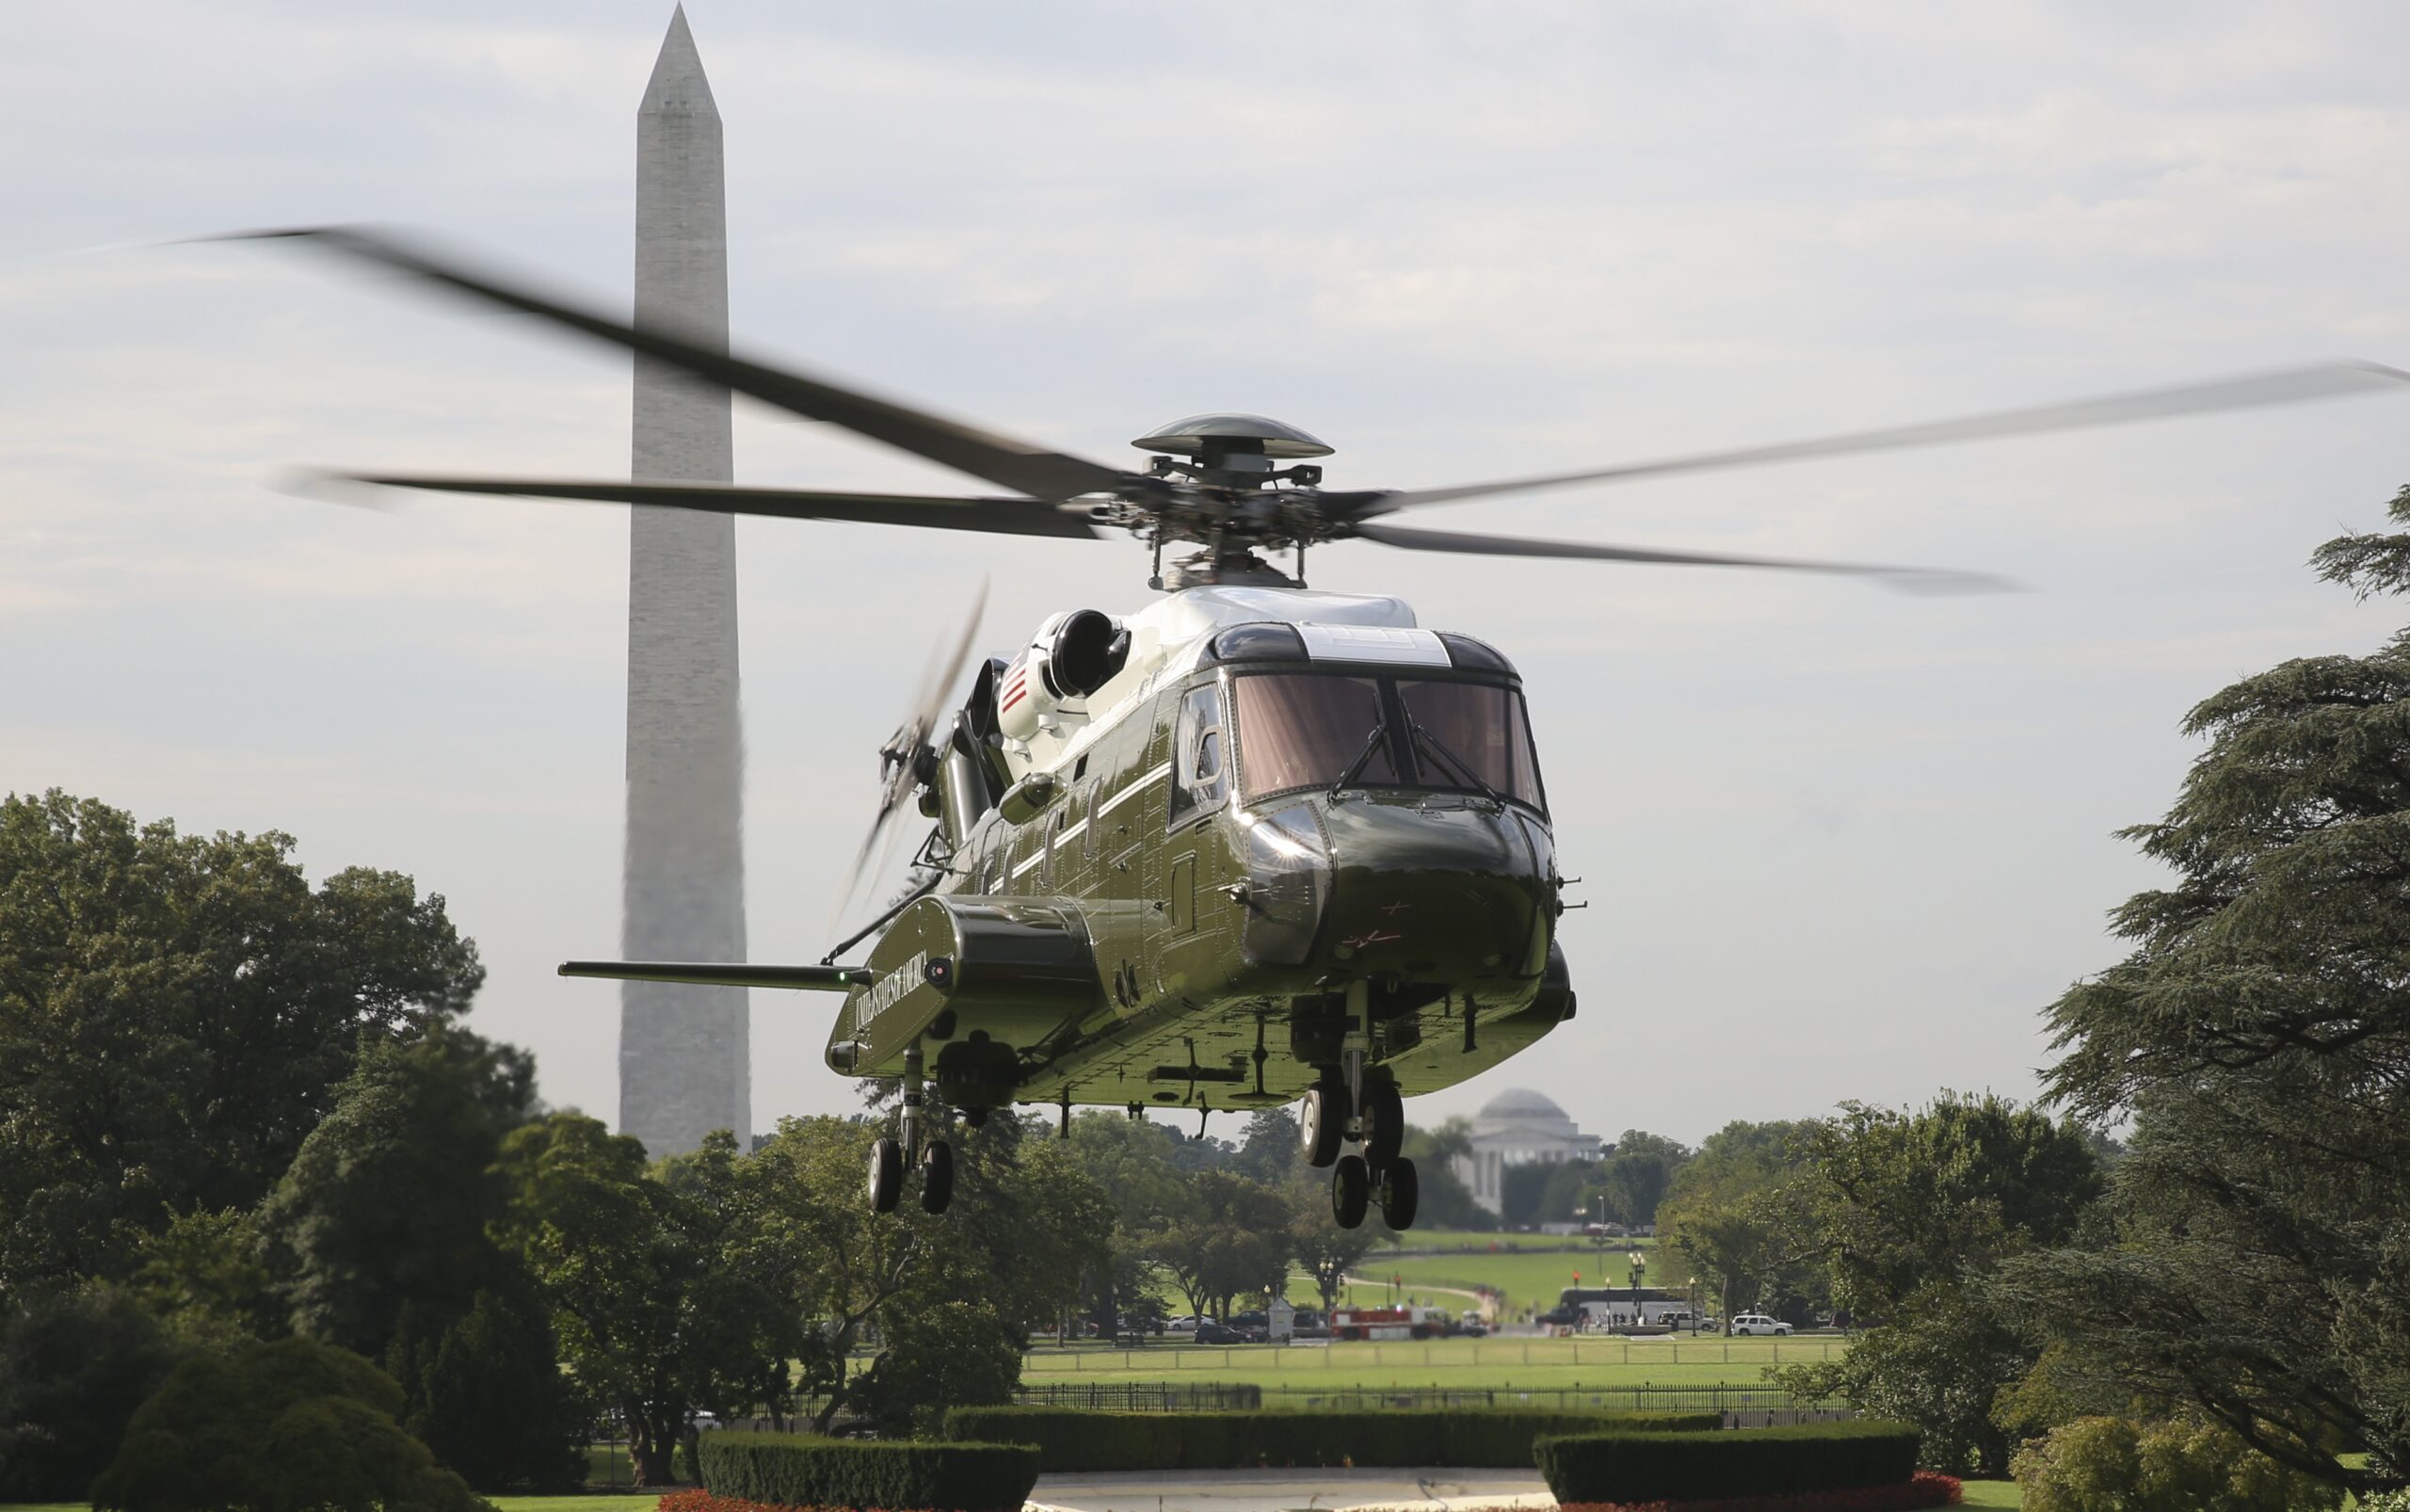 2021-02-06 08:19:02 | Sikorsky to build six VH-92A helicopters for Biden administration